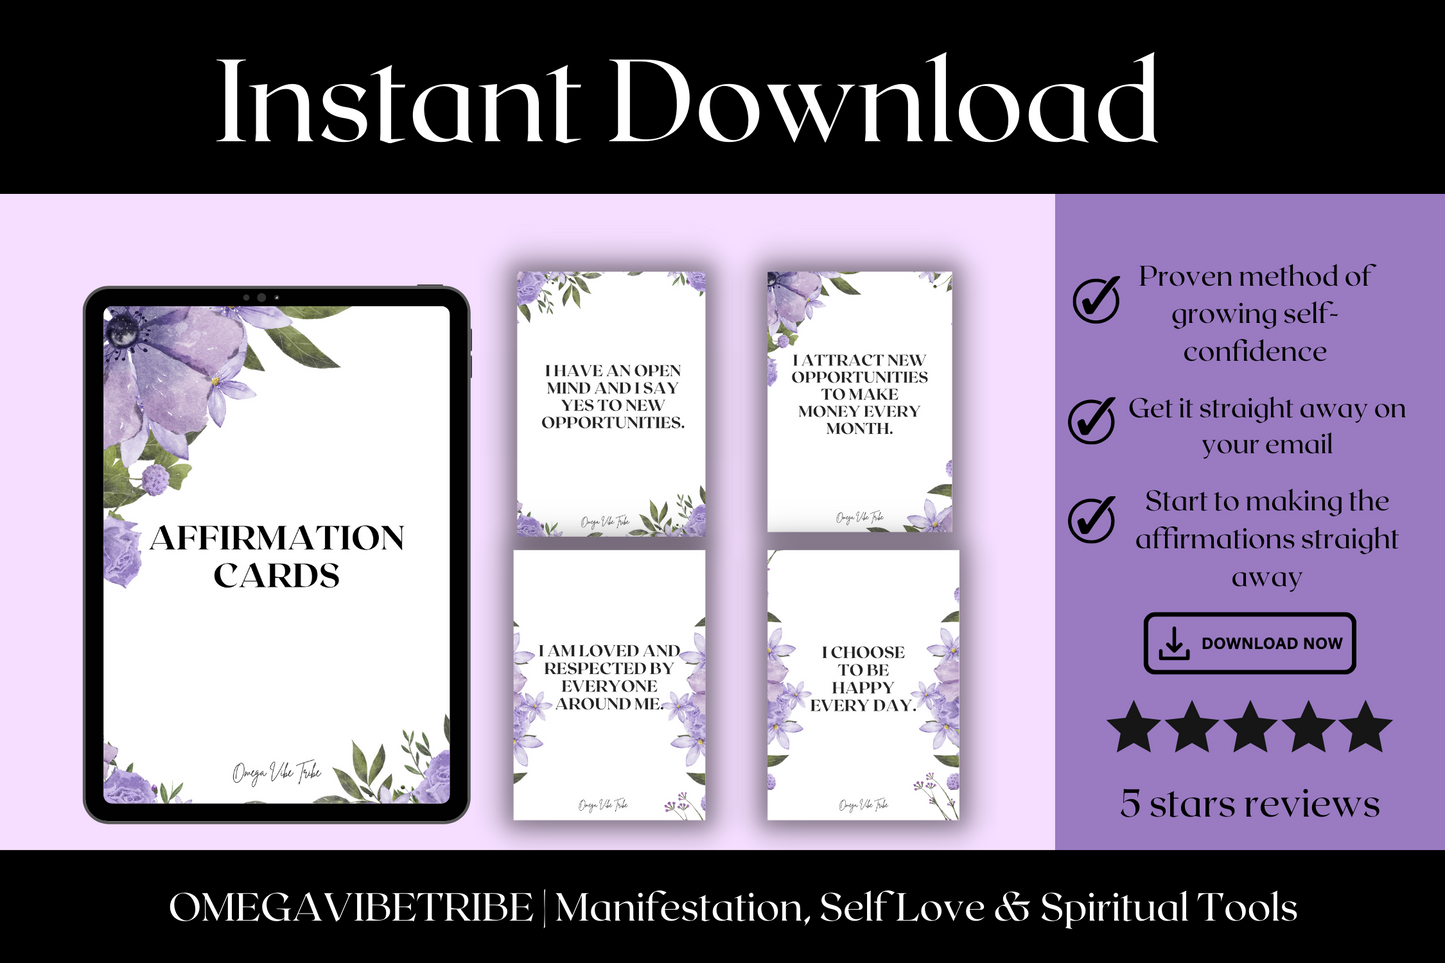 buy these affirmation cards printable and download it instantly.